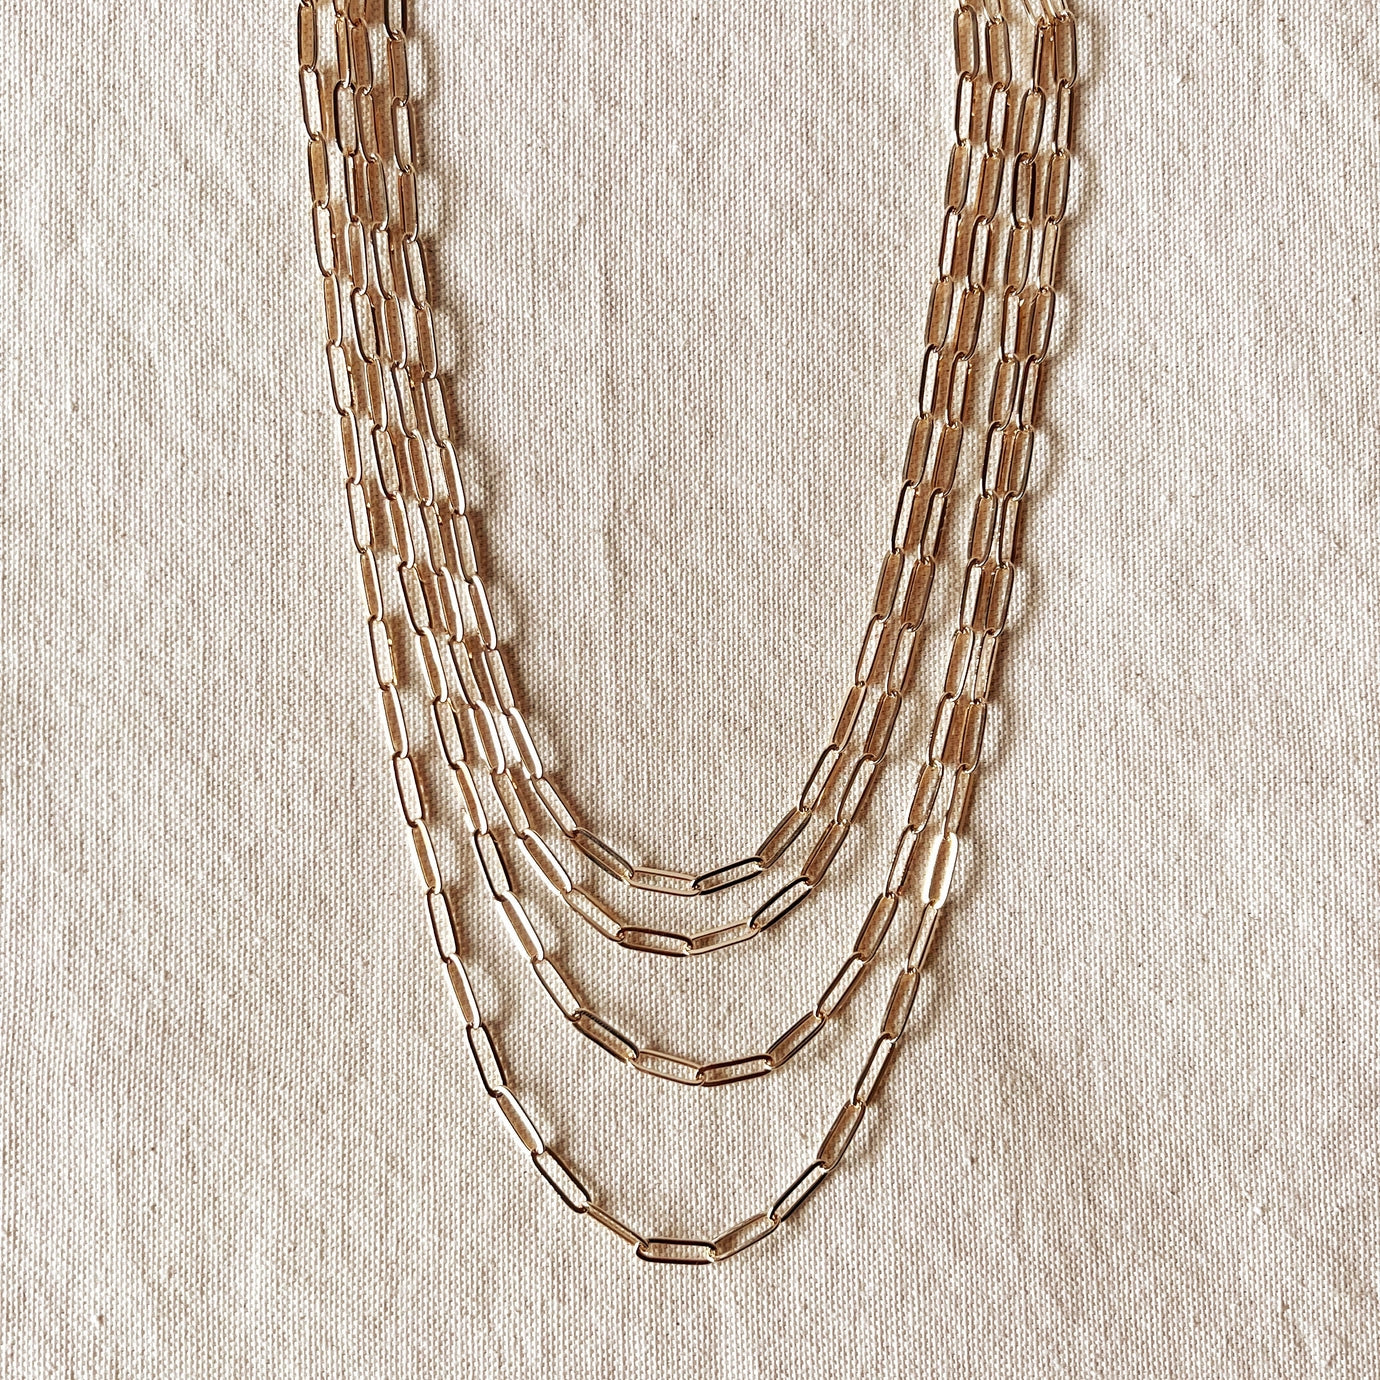 Classic Paperclip Chain, 18k Gold Filled